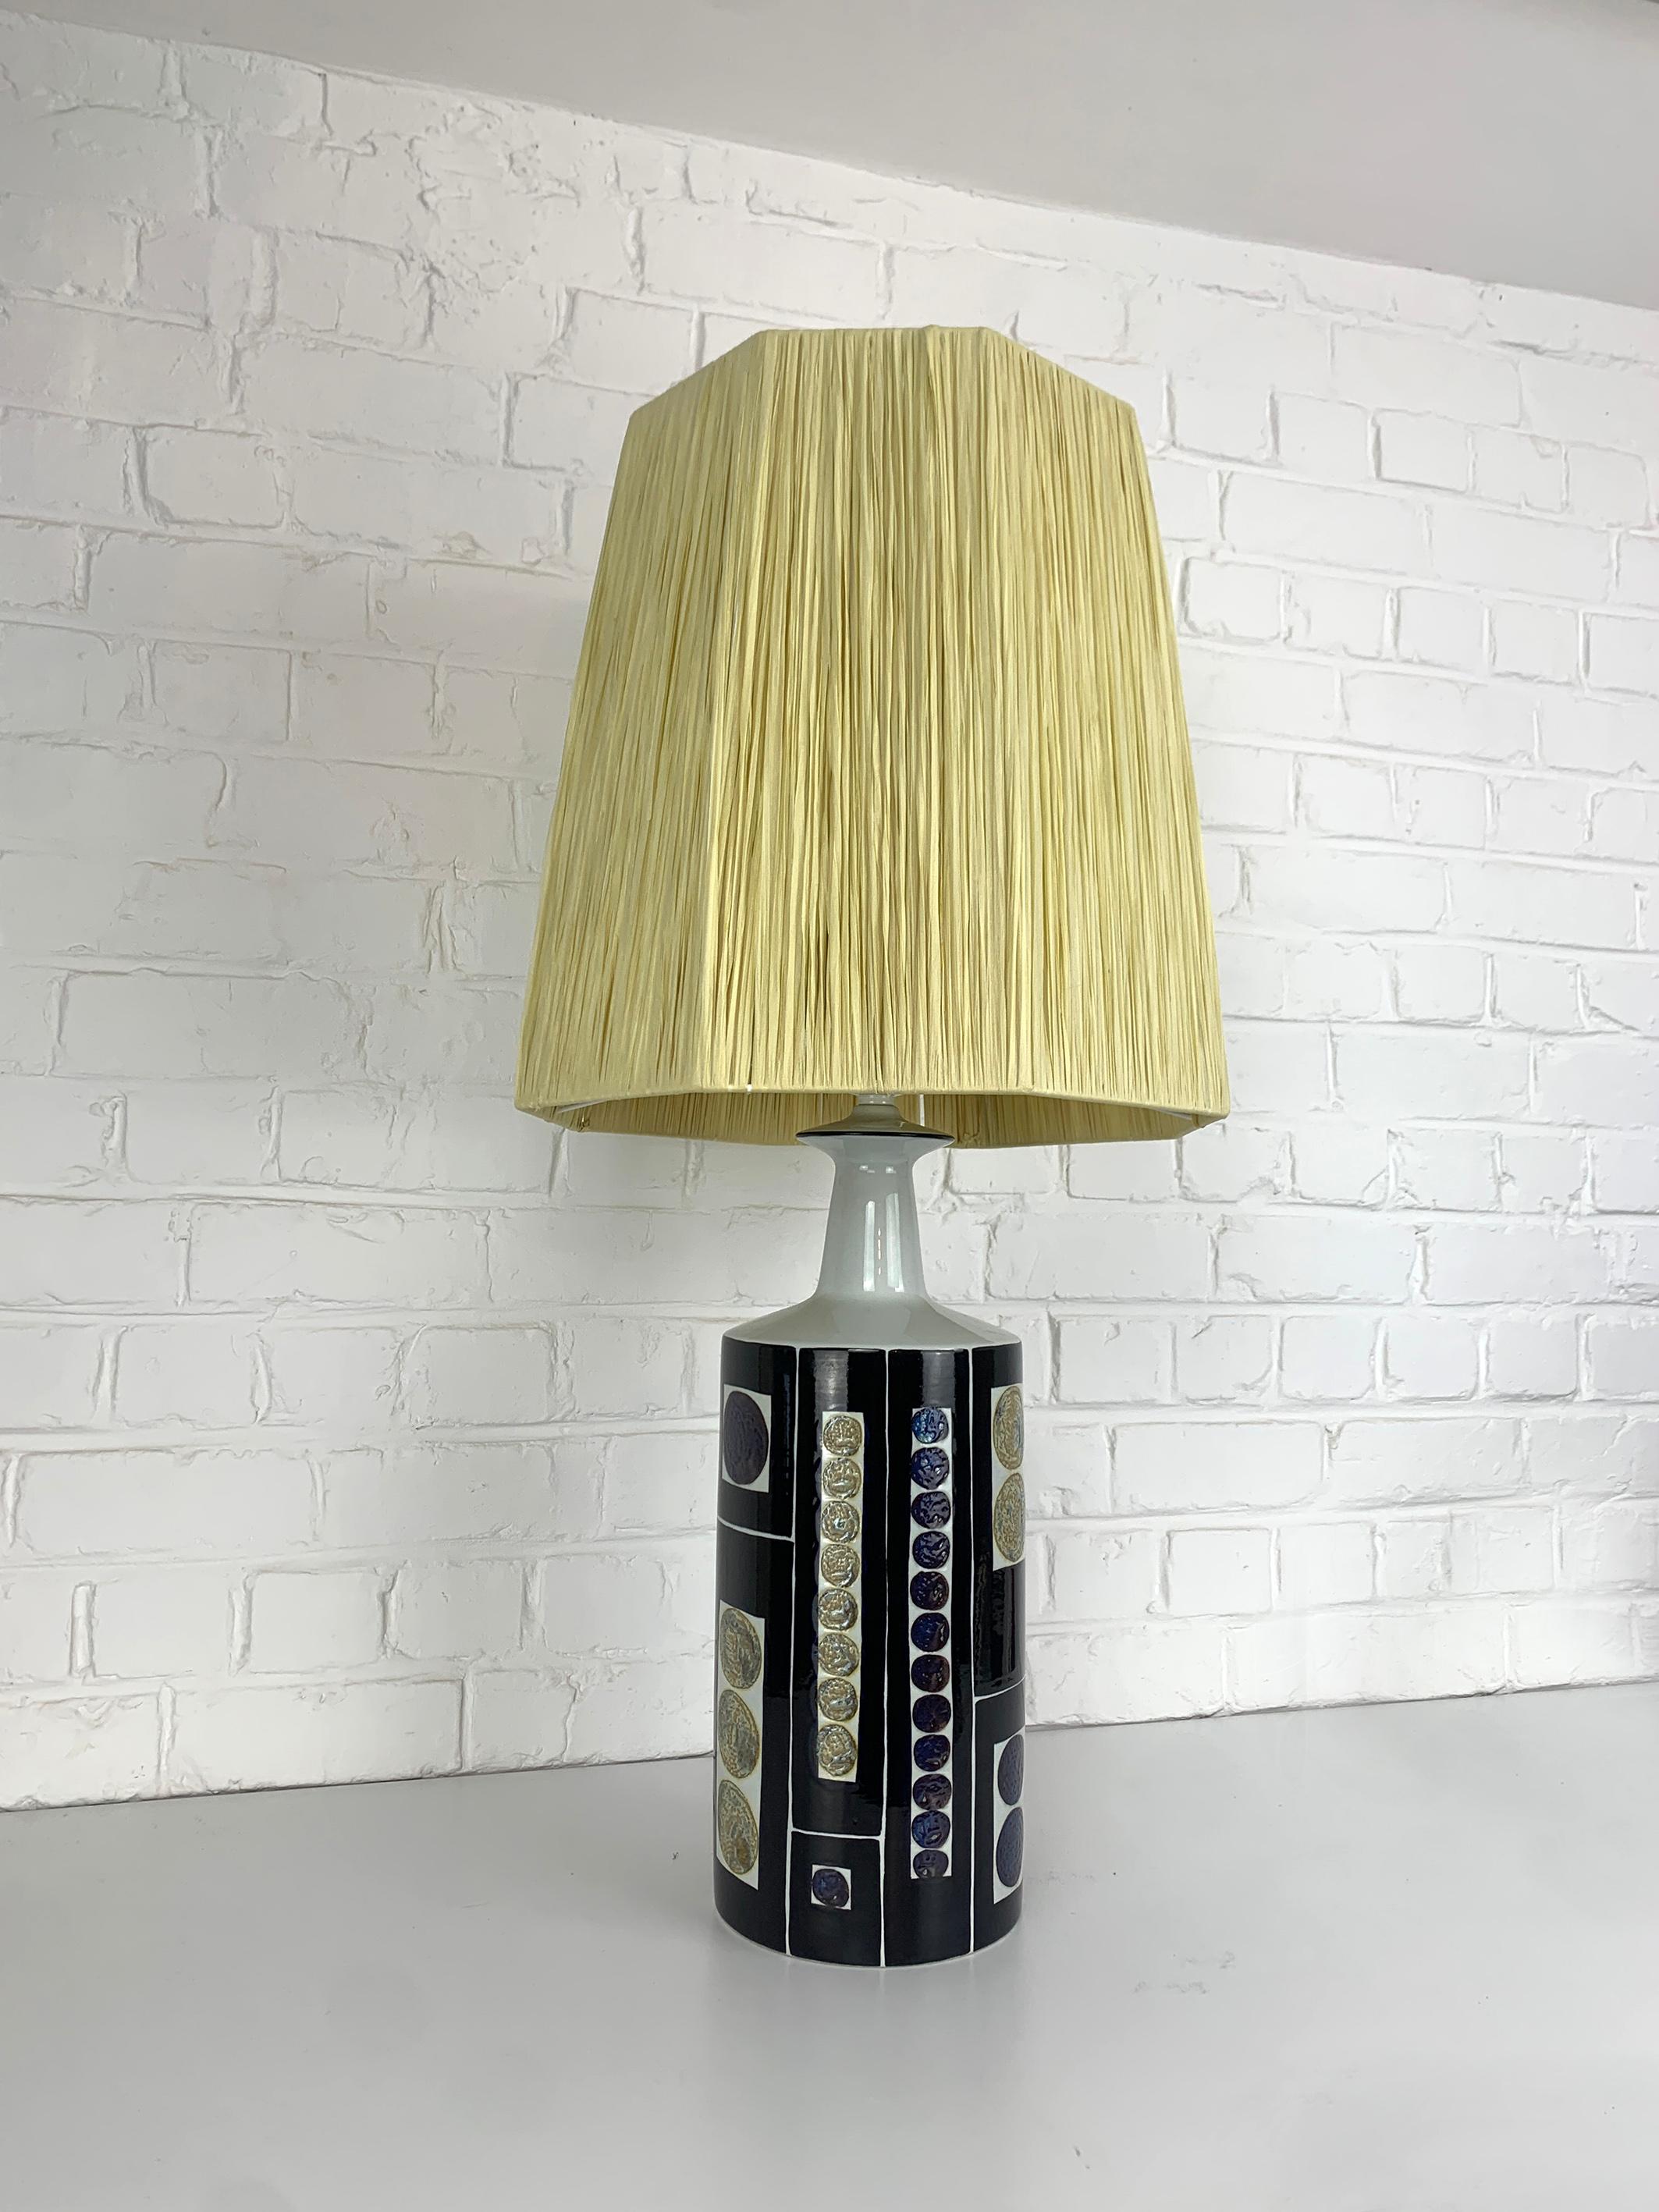 Large table lamp from the late 1960s or early 1970s. This lamp has been manufactured by Royal Copenhagen and sold by Fog & Mørup, Denmark. 

Impressive bold graphic design by Inge-Lise Koefoed, featuring a decor in dark blue with greyish / beige